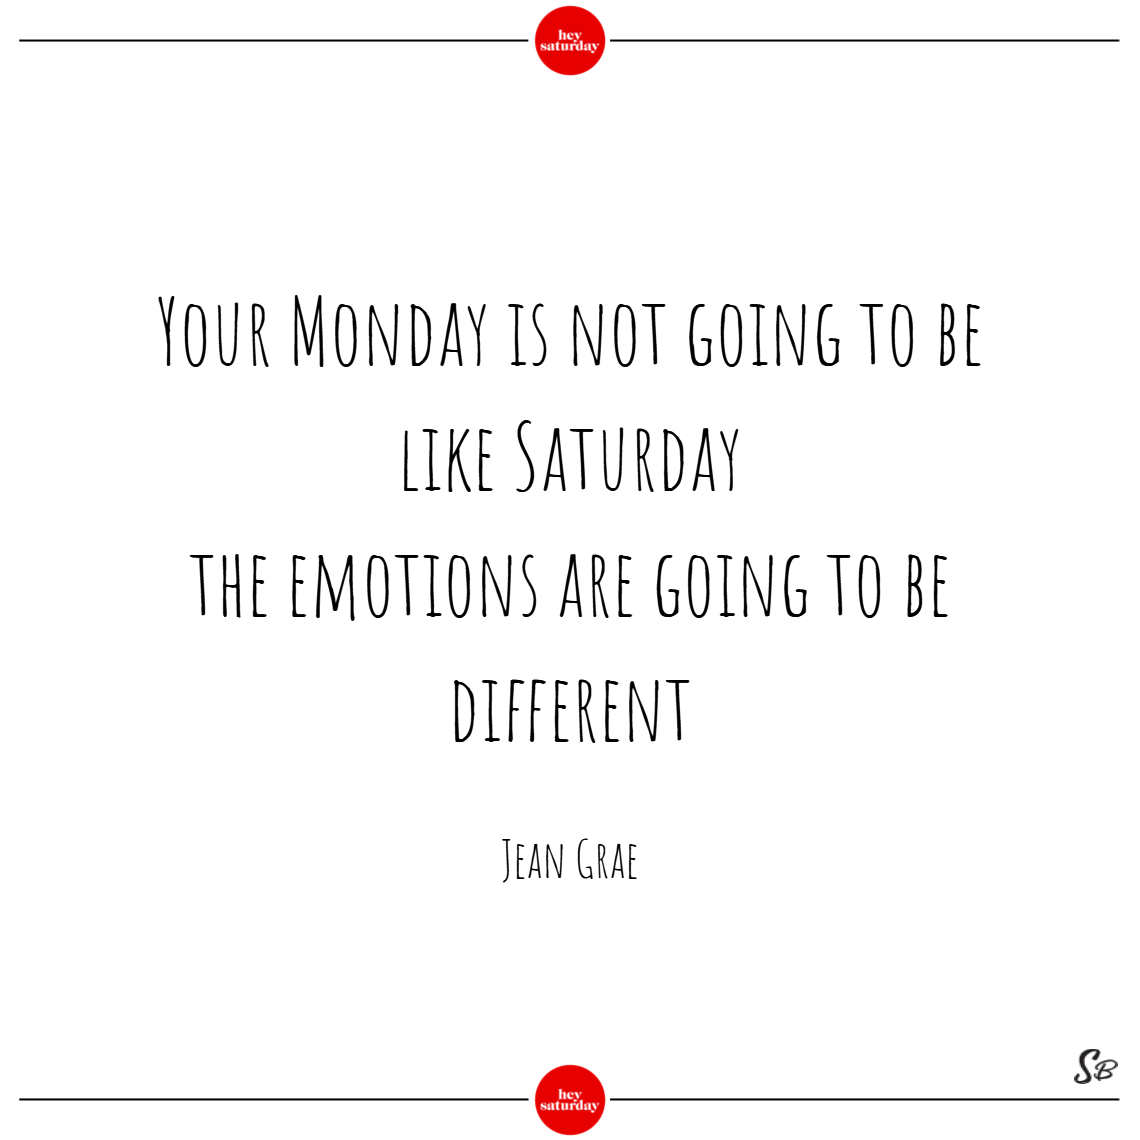 Your monday is not going to be like saturday; the emotions are going to be different. - jean grae